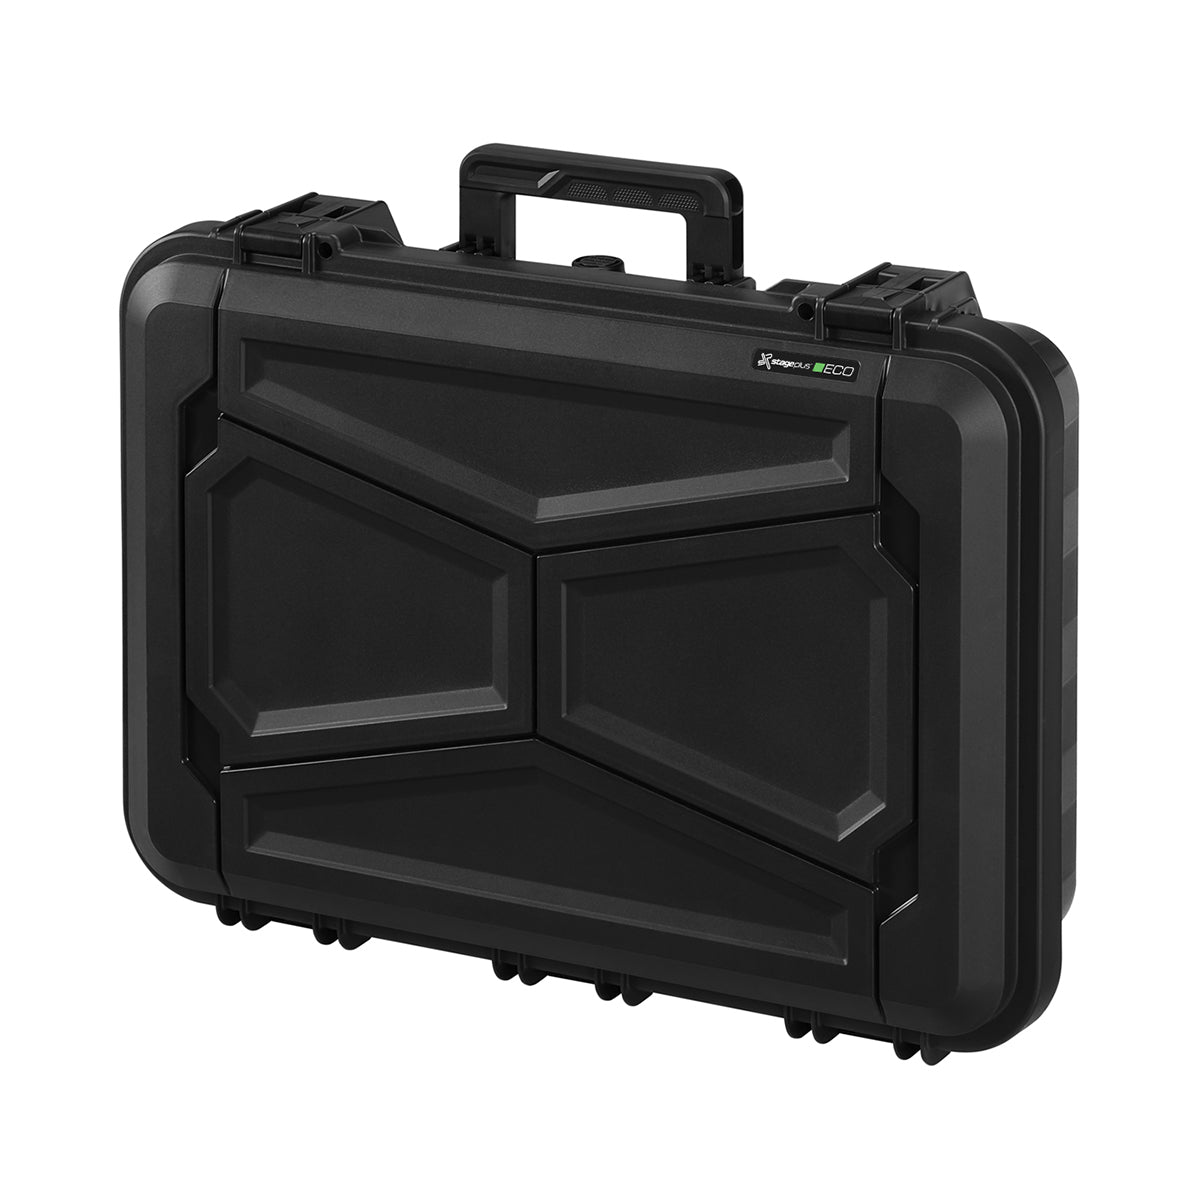 SP ECO 90S Black Carry Case, Cubed Foam, ID: L520xW350xH125mm